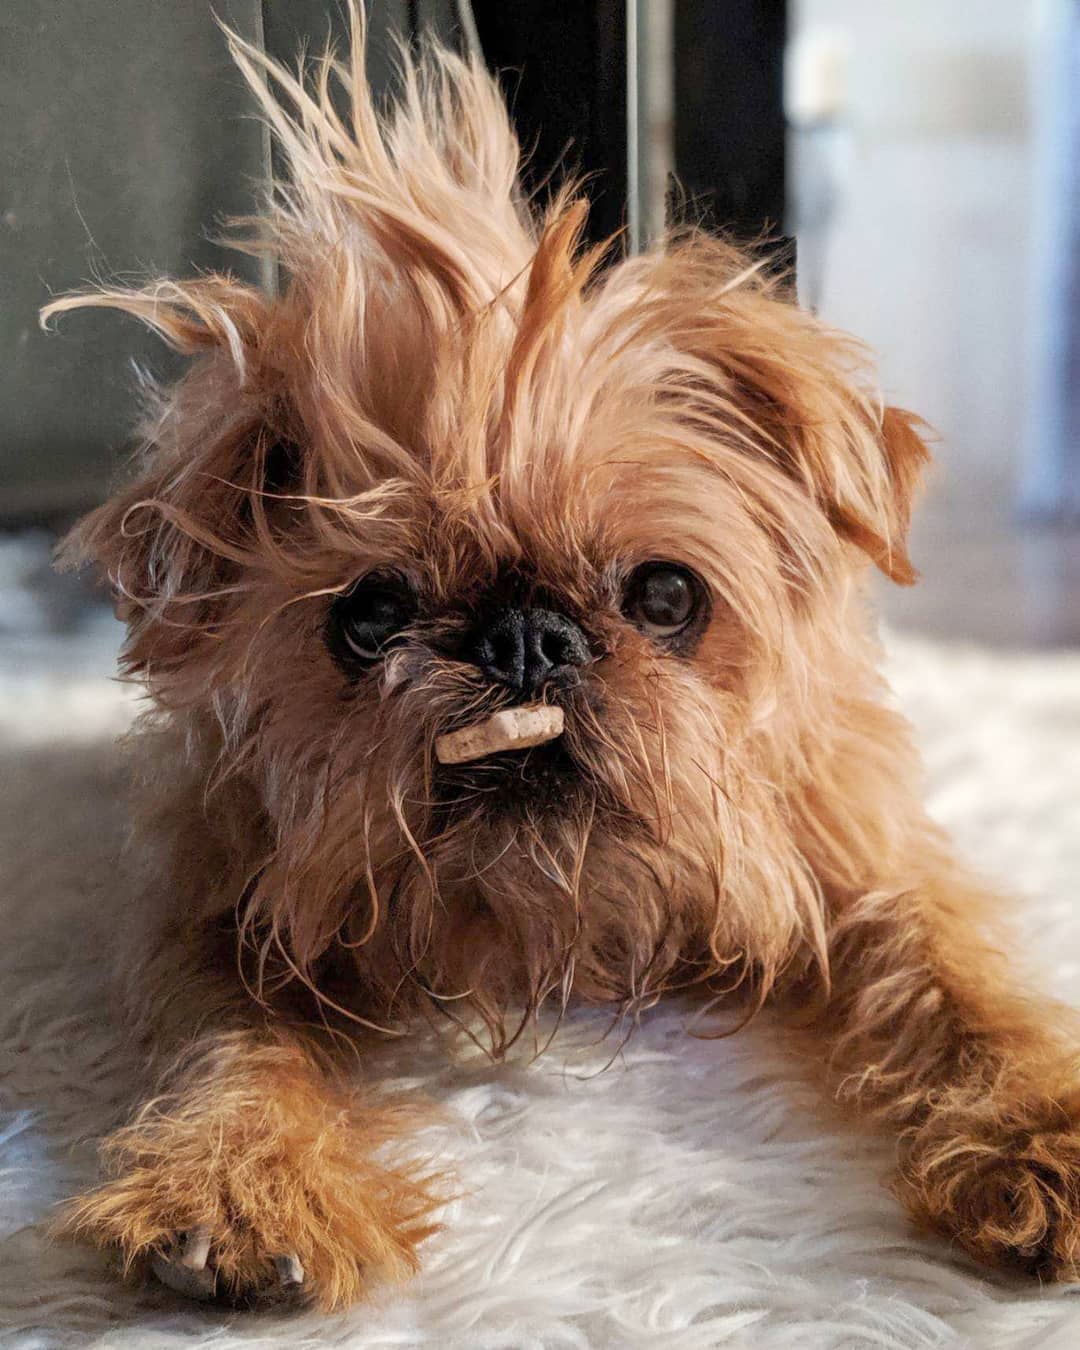 A Brussels Griffon lying on the carpet with a treat in its mouth